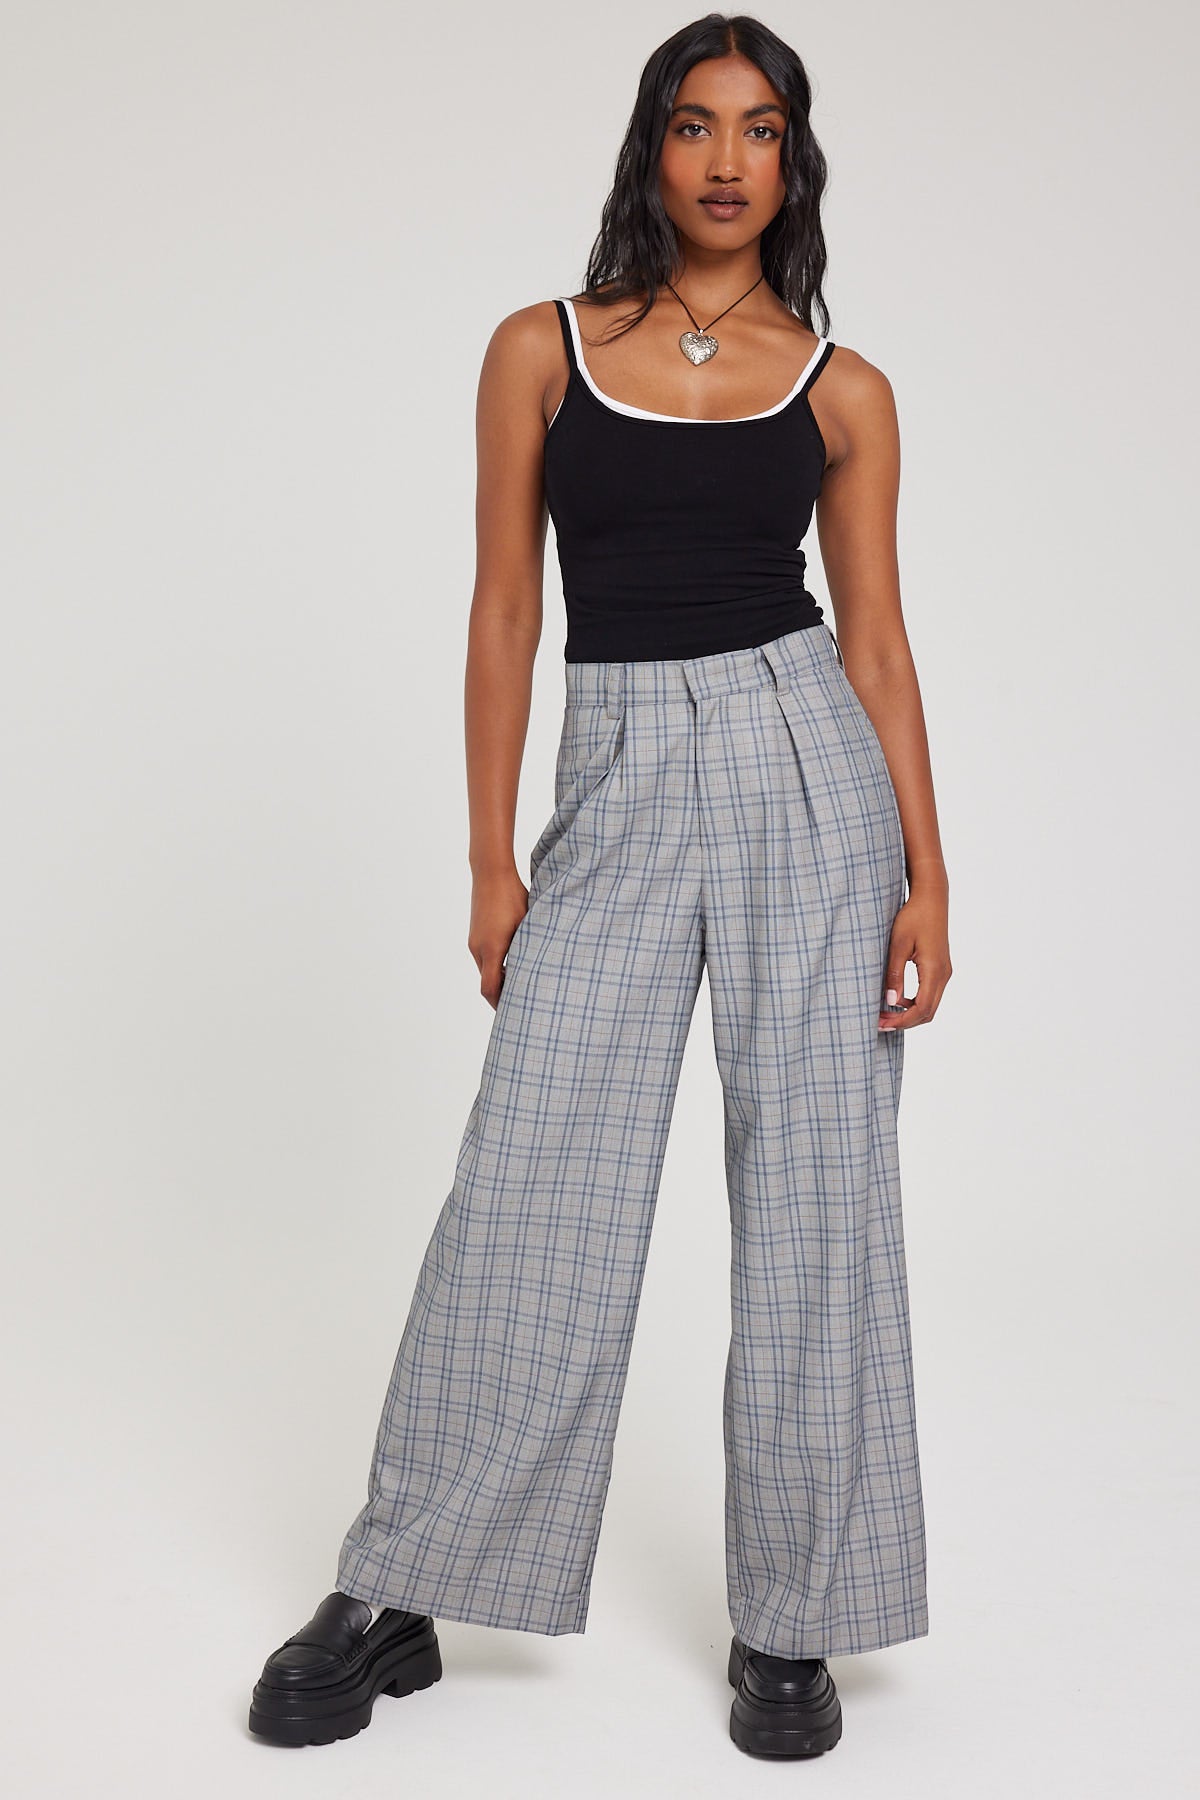 Perfect Stranger Cameron Mid Rise Pant Grey Check – Universal Store